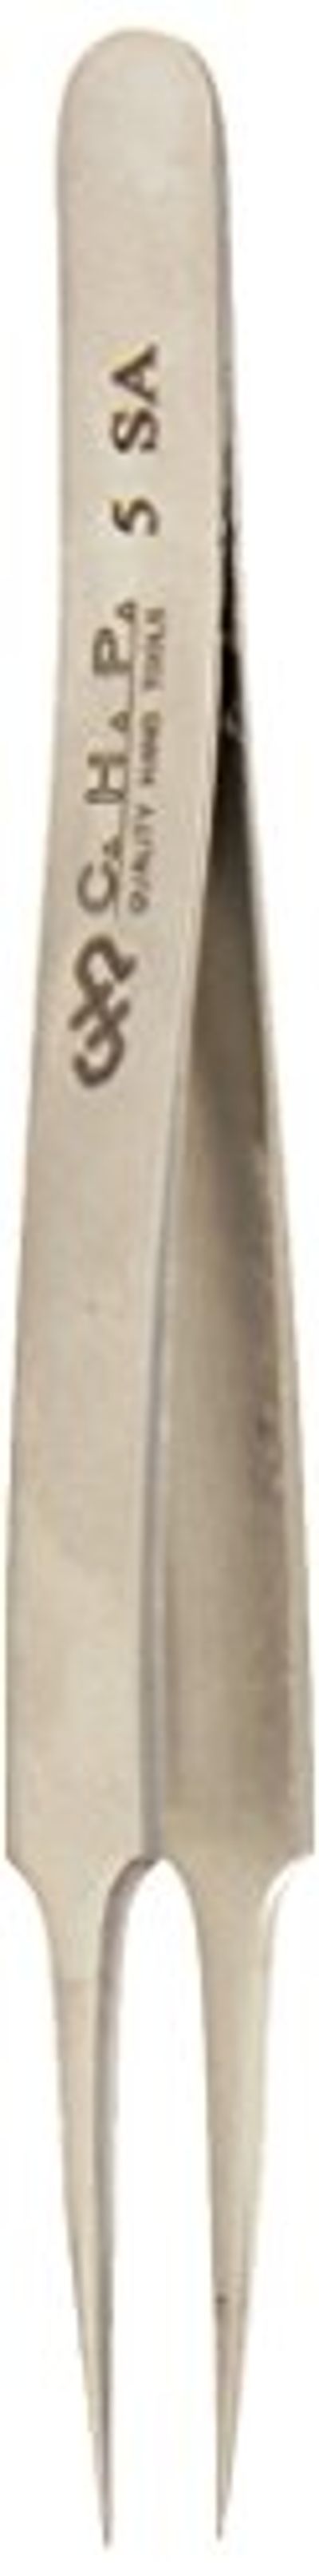 Hakko CHP 5-SA Stainless Steel Non-Magnetic Precision Tweezers with Super-Fine Point Thin-Tapered Sharp Tips, 4-1/4" Length $23.77 (Reg $33.09)